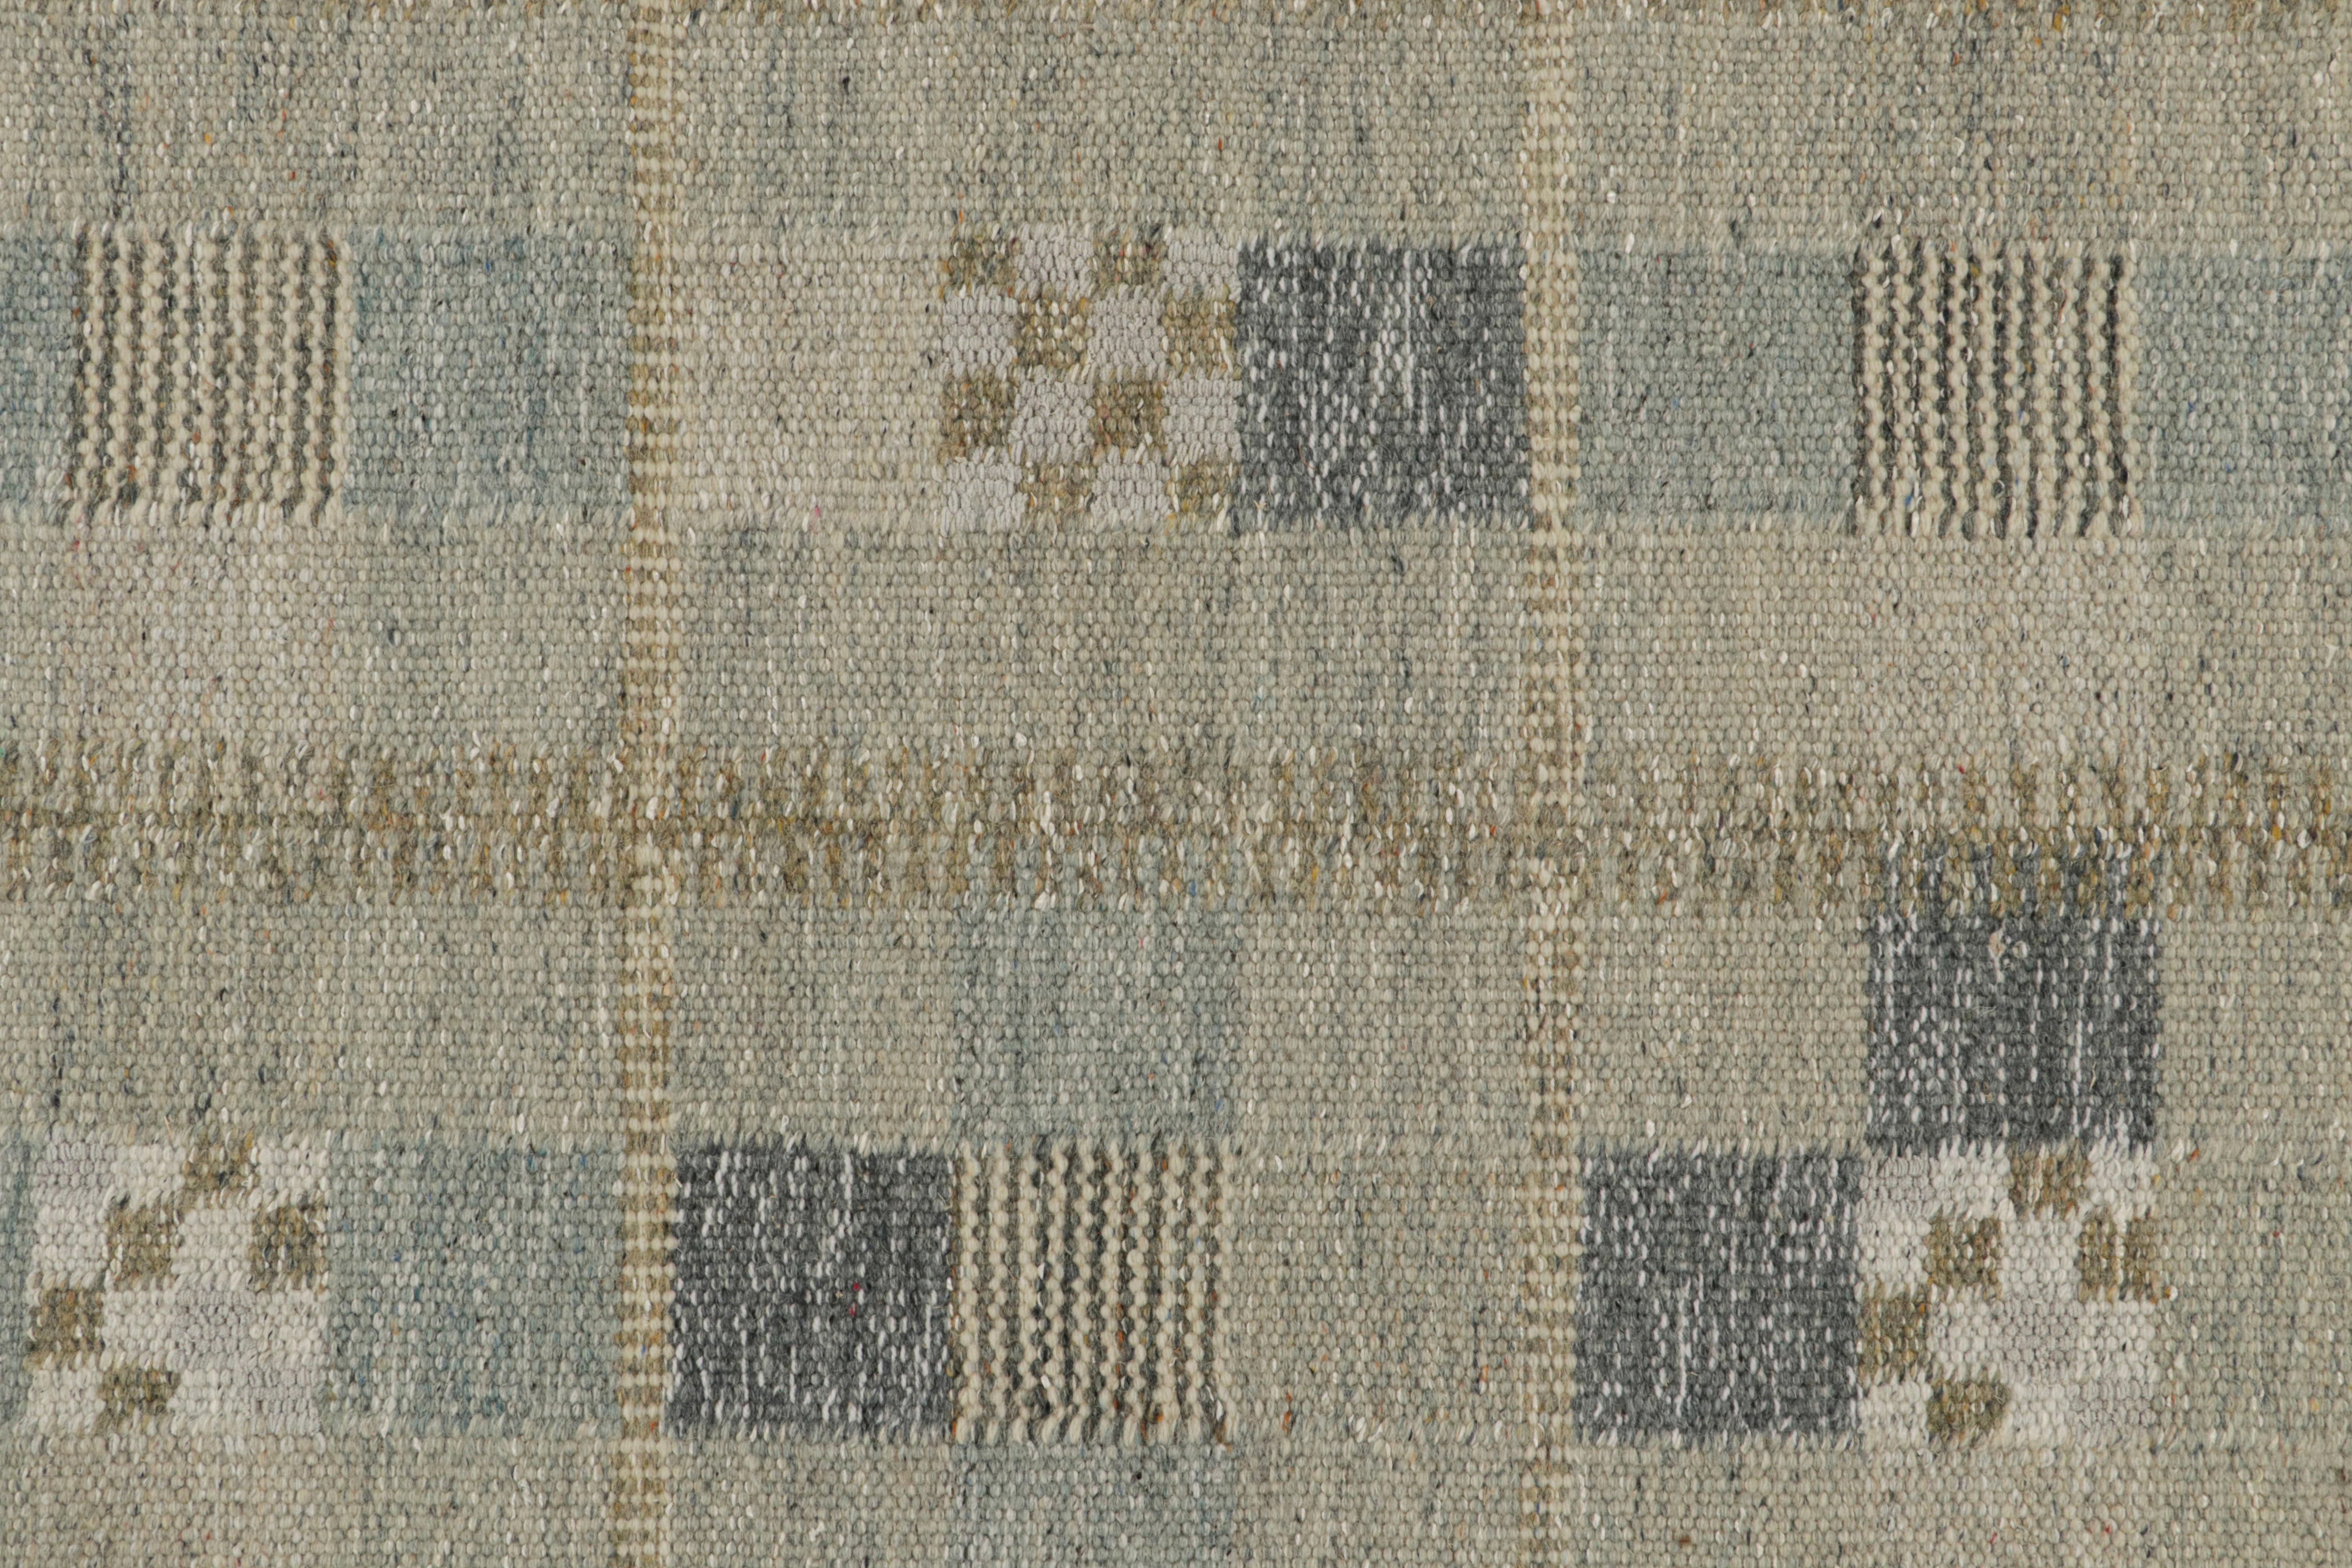 Rug & Kilim’s Scandinavian Style Kilim in Blue & gray Geometric Patterns In New Condition For Sale In Long Island City, NY